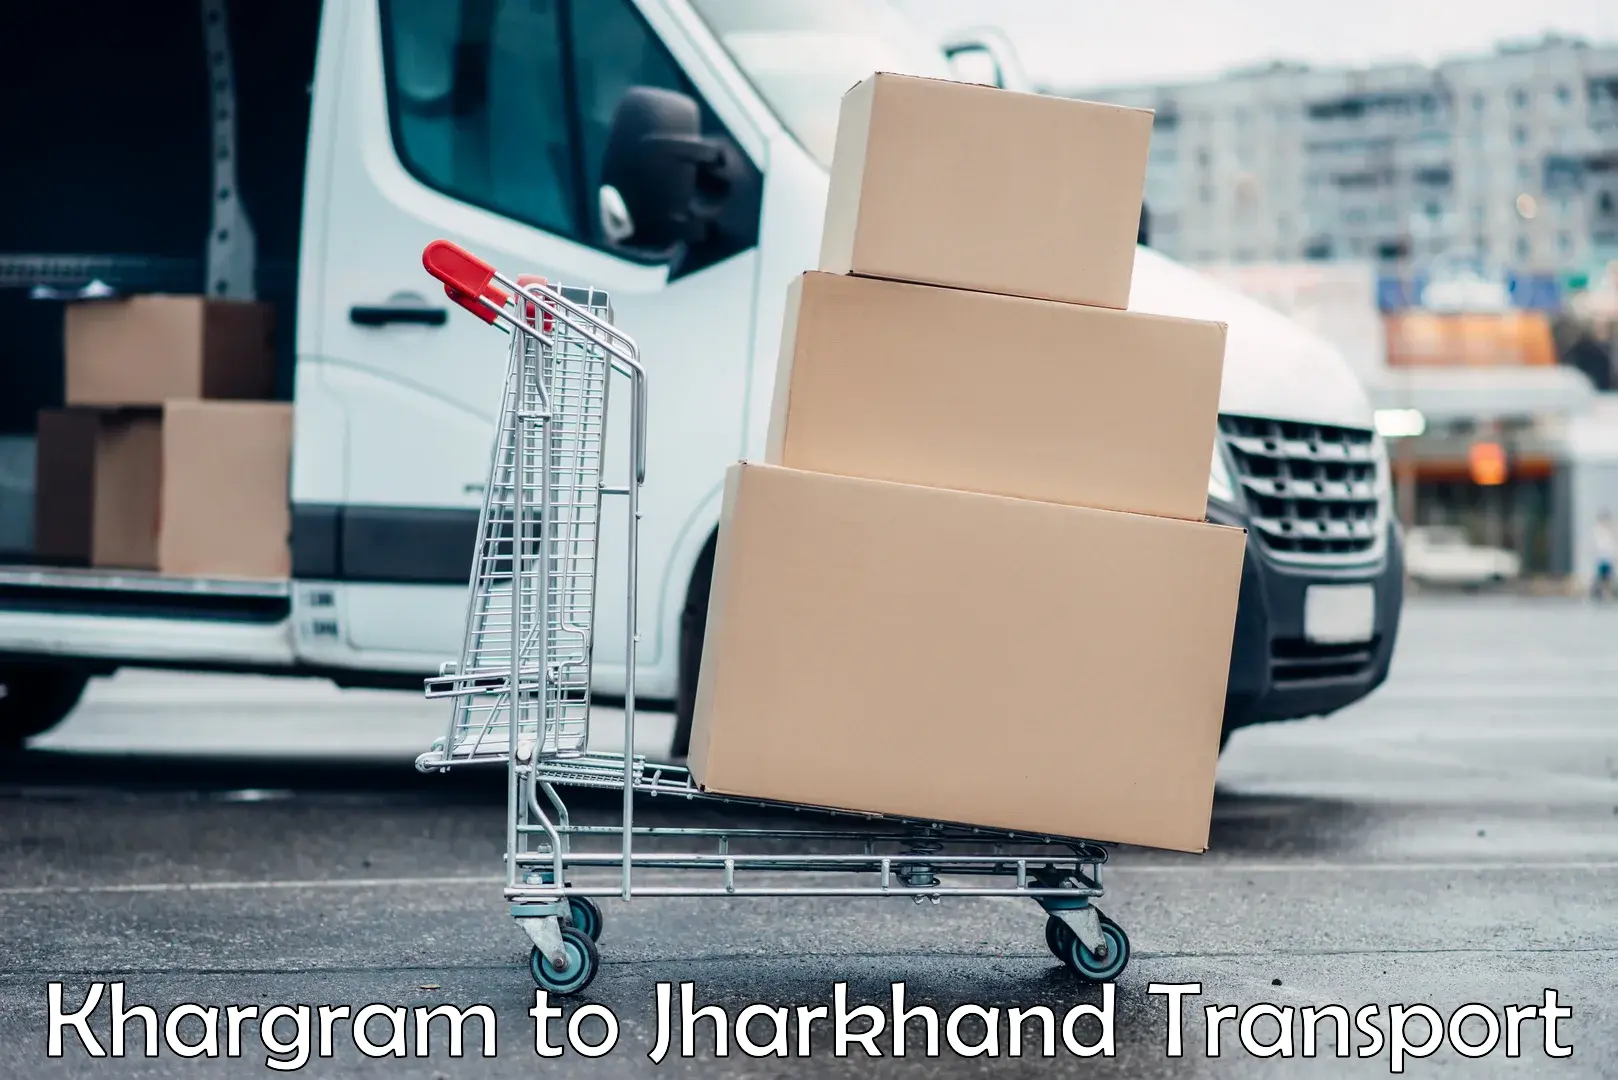 Daily transport service Khargram to Jharkhand